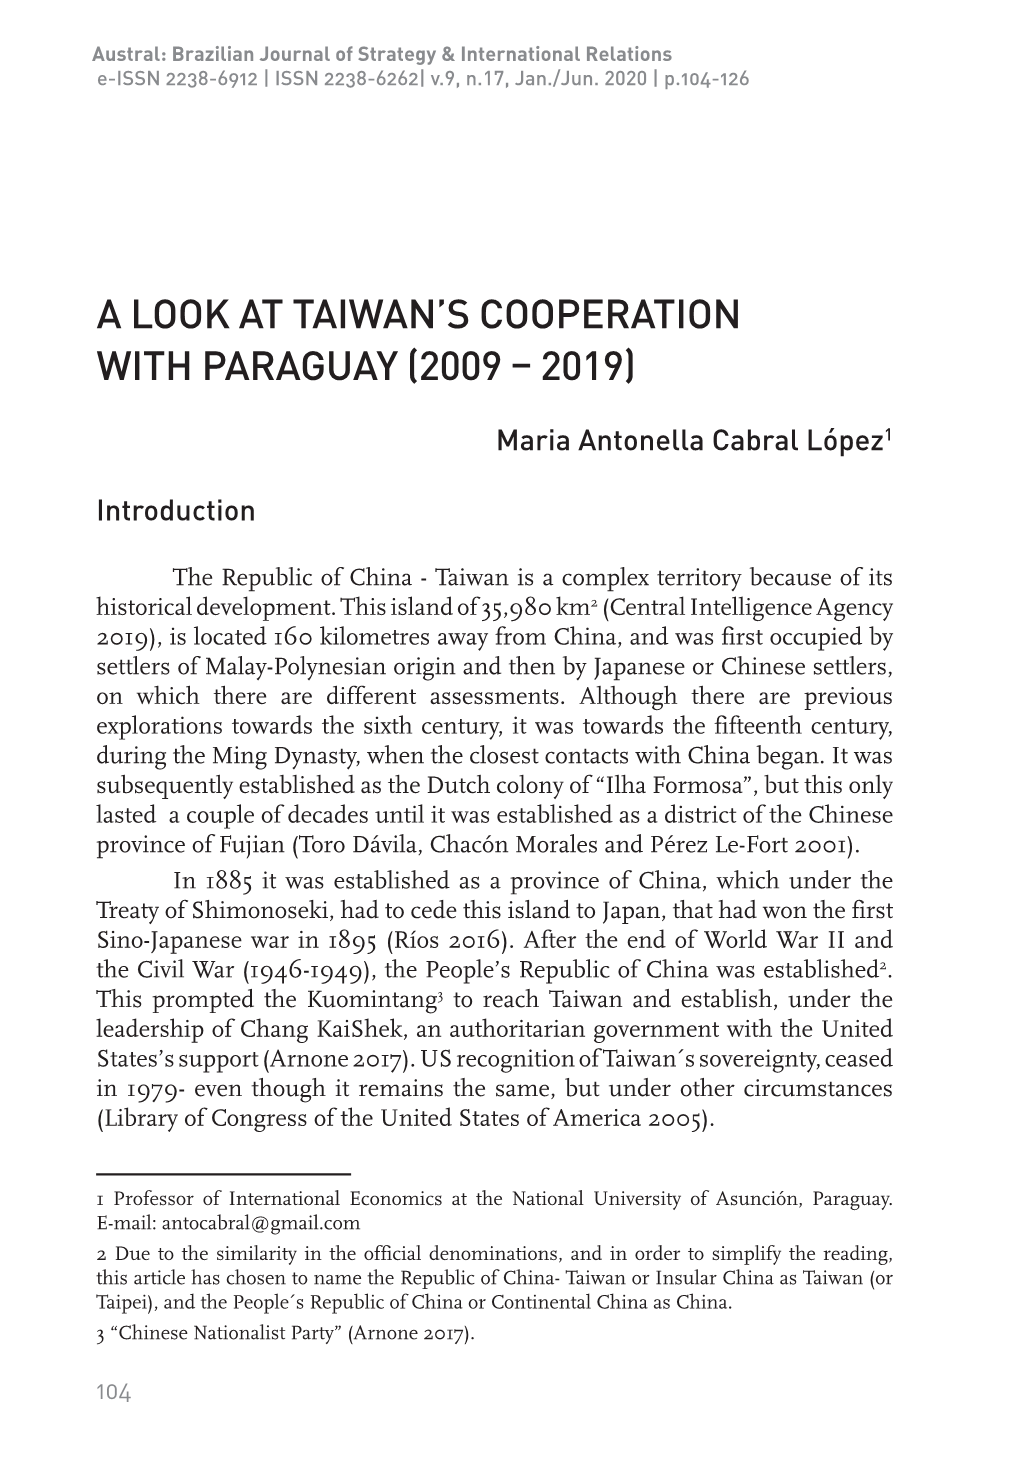 A Look at Taiwan's Cooperation With